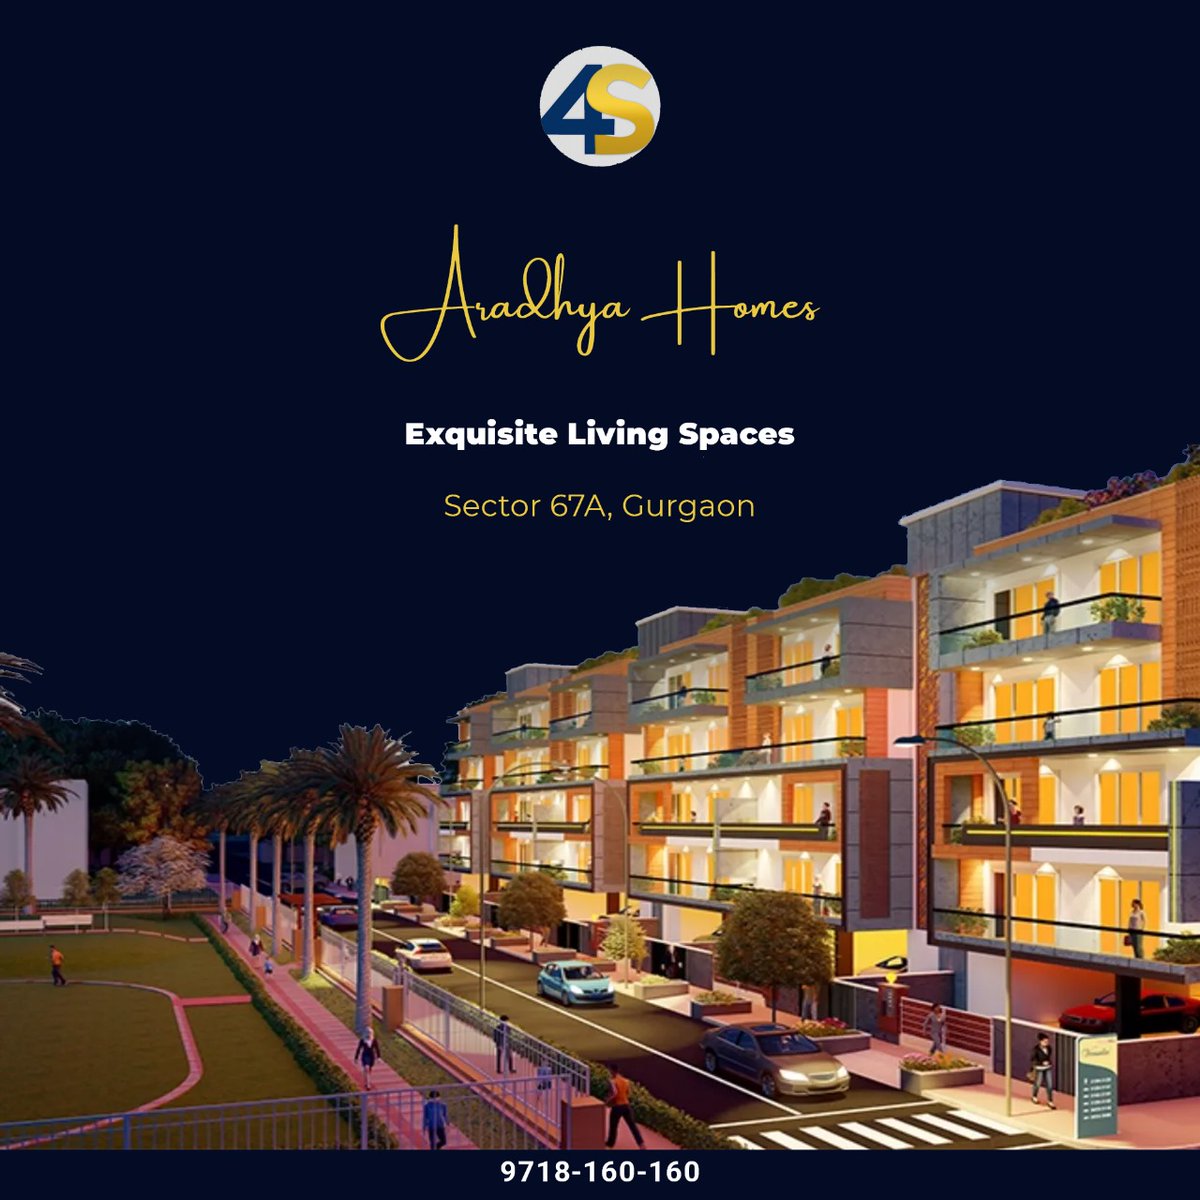 #AradhyaHomes in Sector 67A, #Gurgaon - #AssetsGalleria

A Newly Launched #Residential Project that Offers Best #4BHK #LowRiseFloors At Very #Reasonable Prices.

#newhome #realestate #home #realtor #househunting #dreamhome #homesweethome #realestateagent #property #forsale